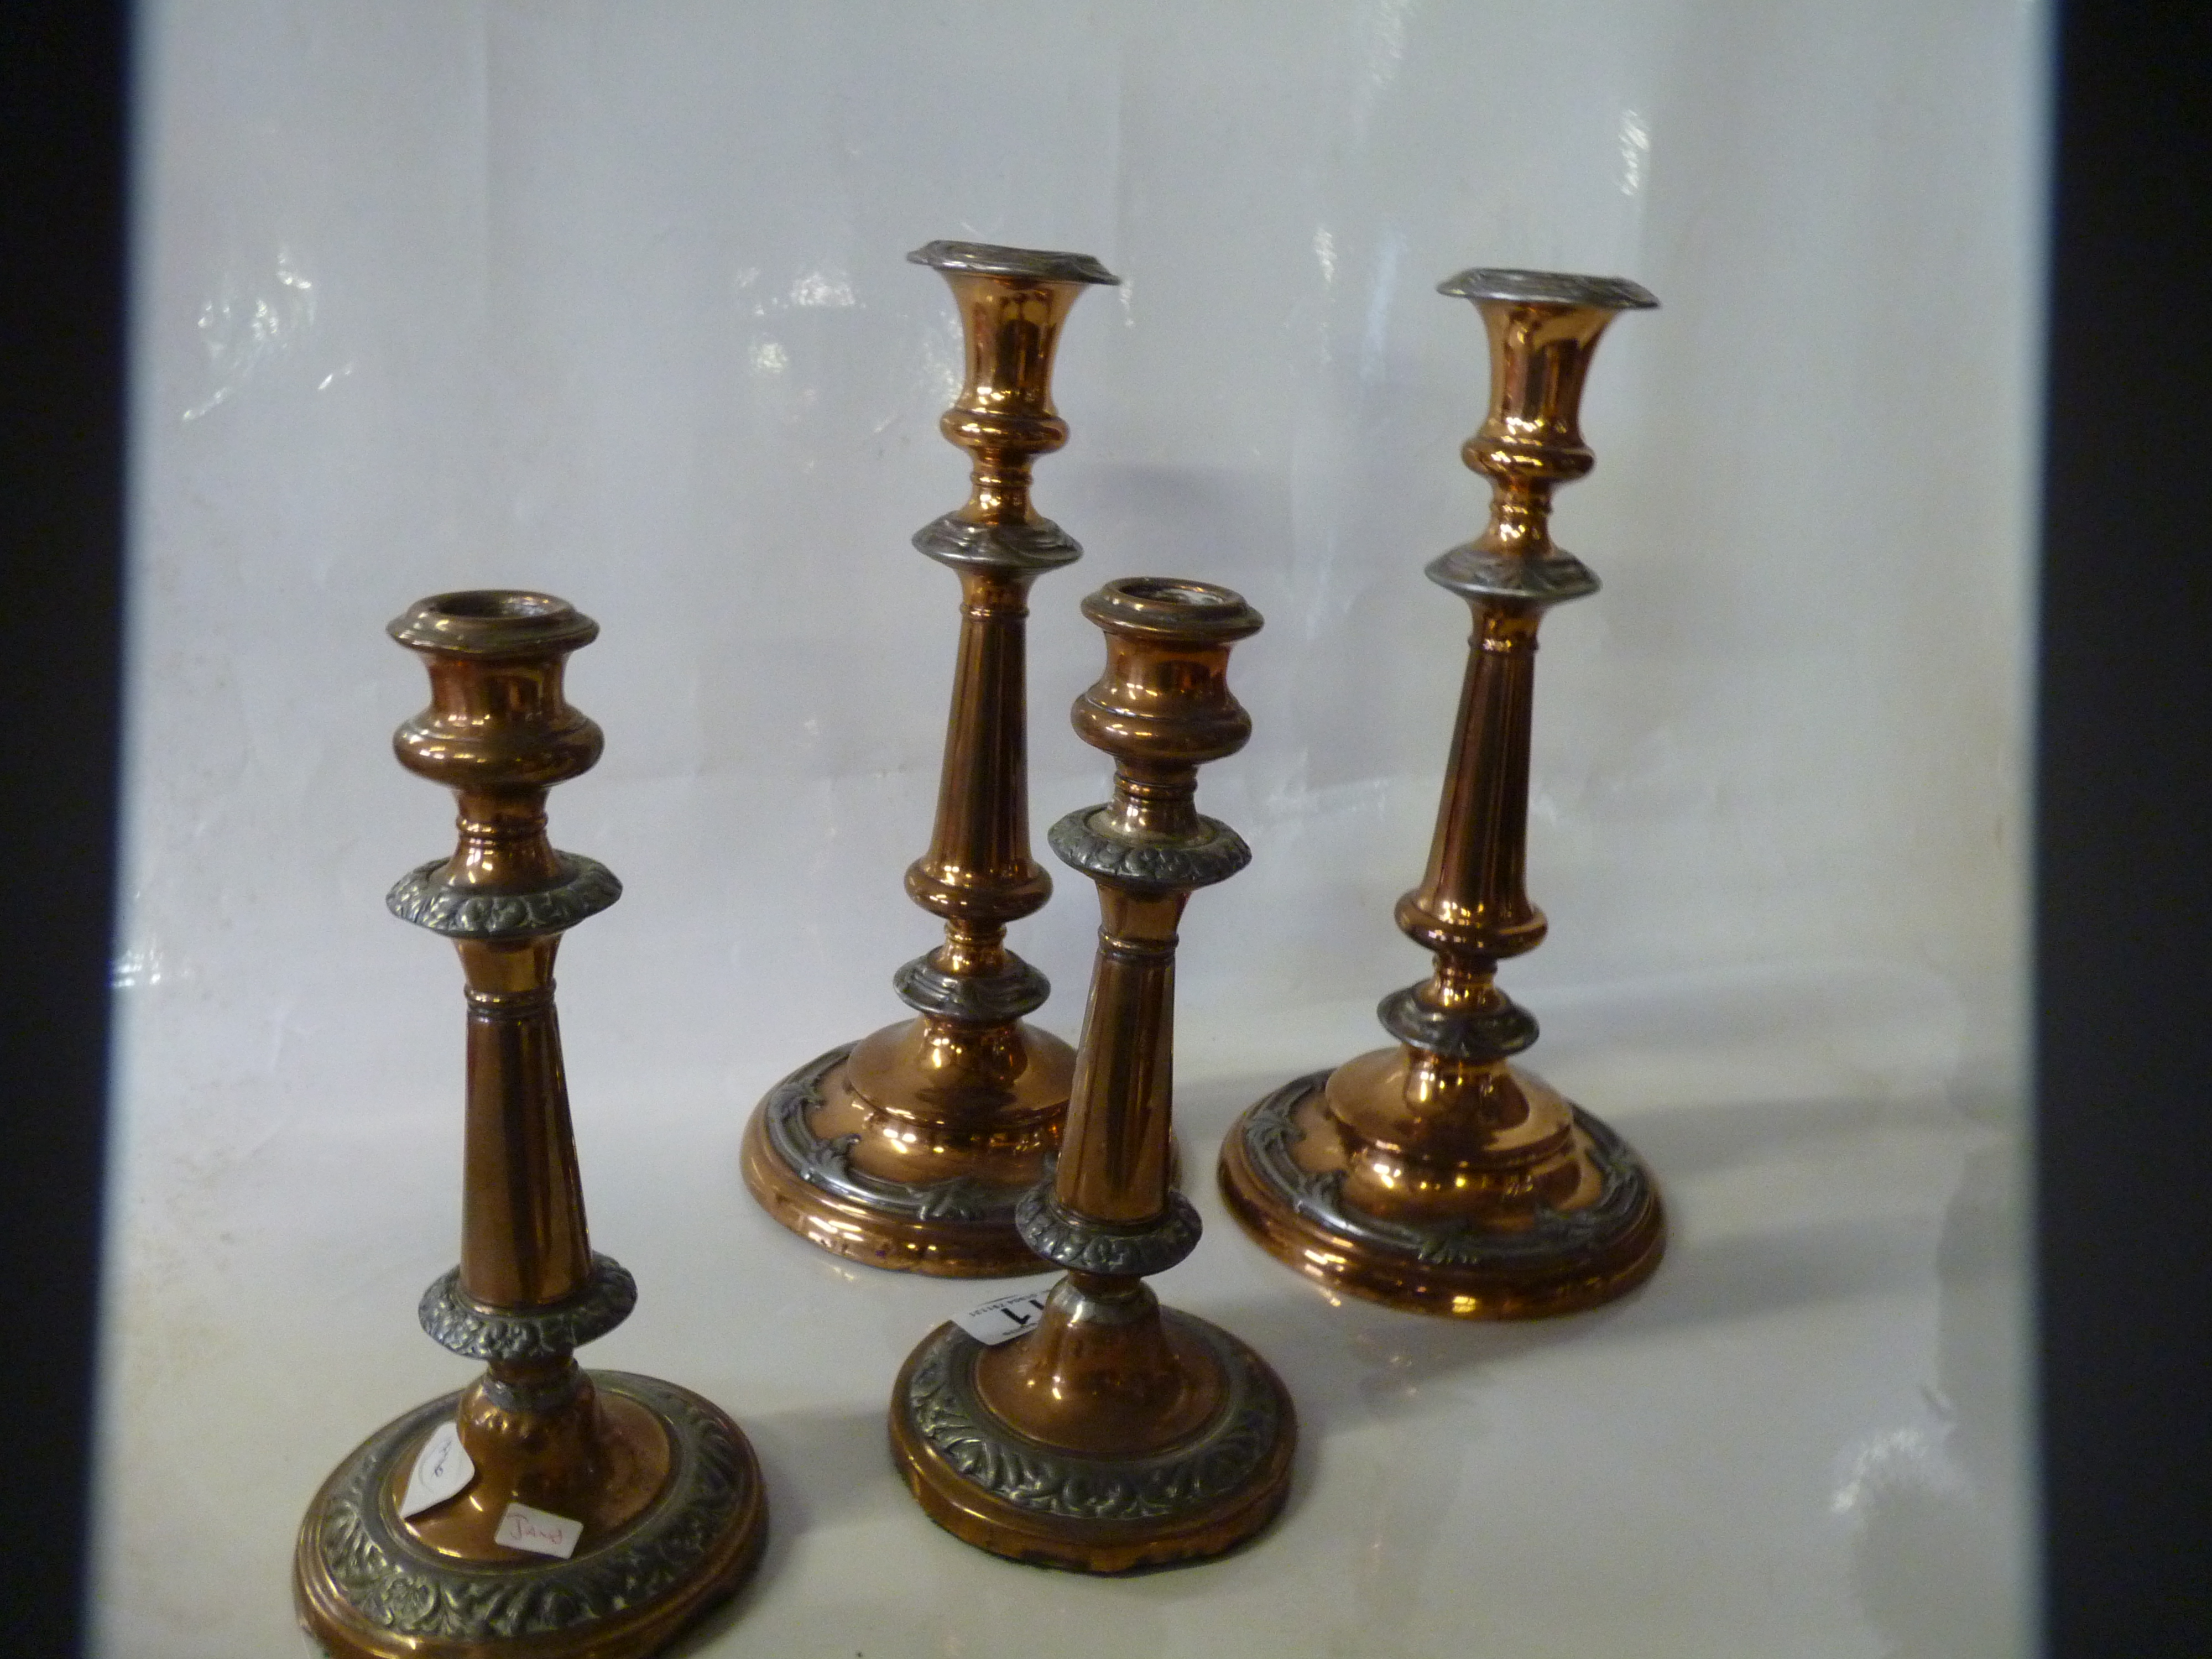 2 x Pairs of Arts and Crafts Candlesticks